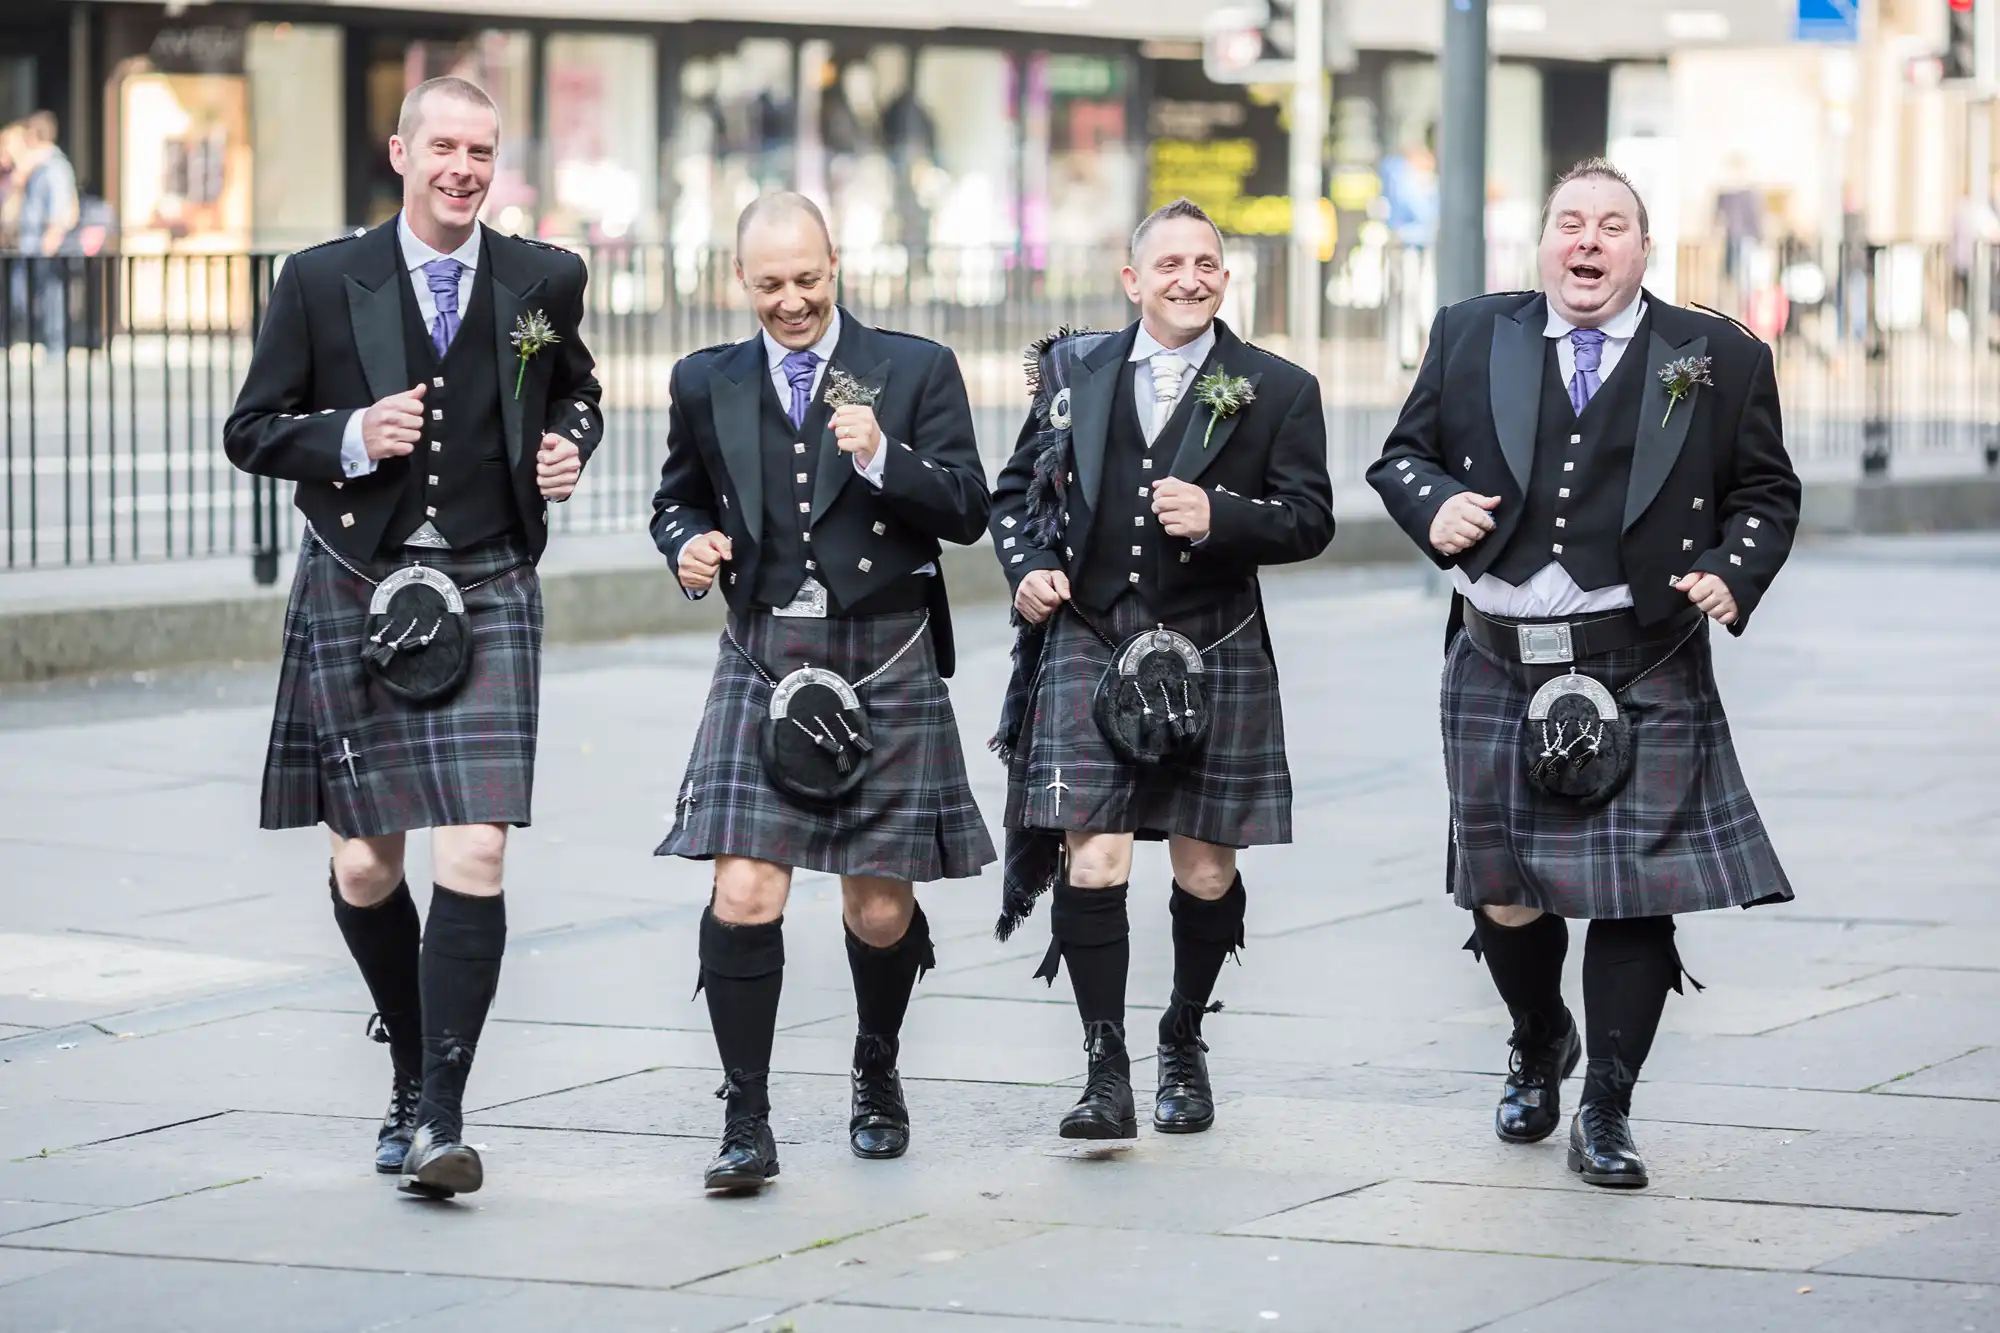 Four men in traditional scottish kilts and jackets joyfully walking down a city street, laughing and holding boutonnières.